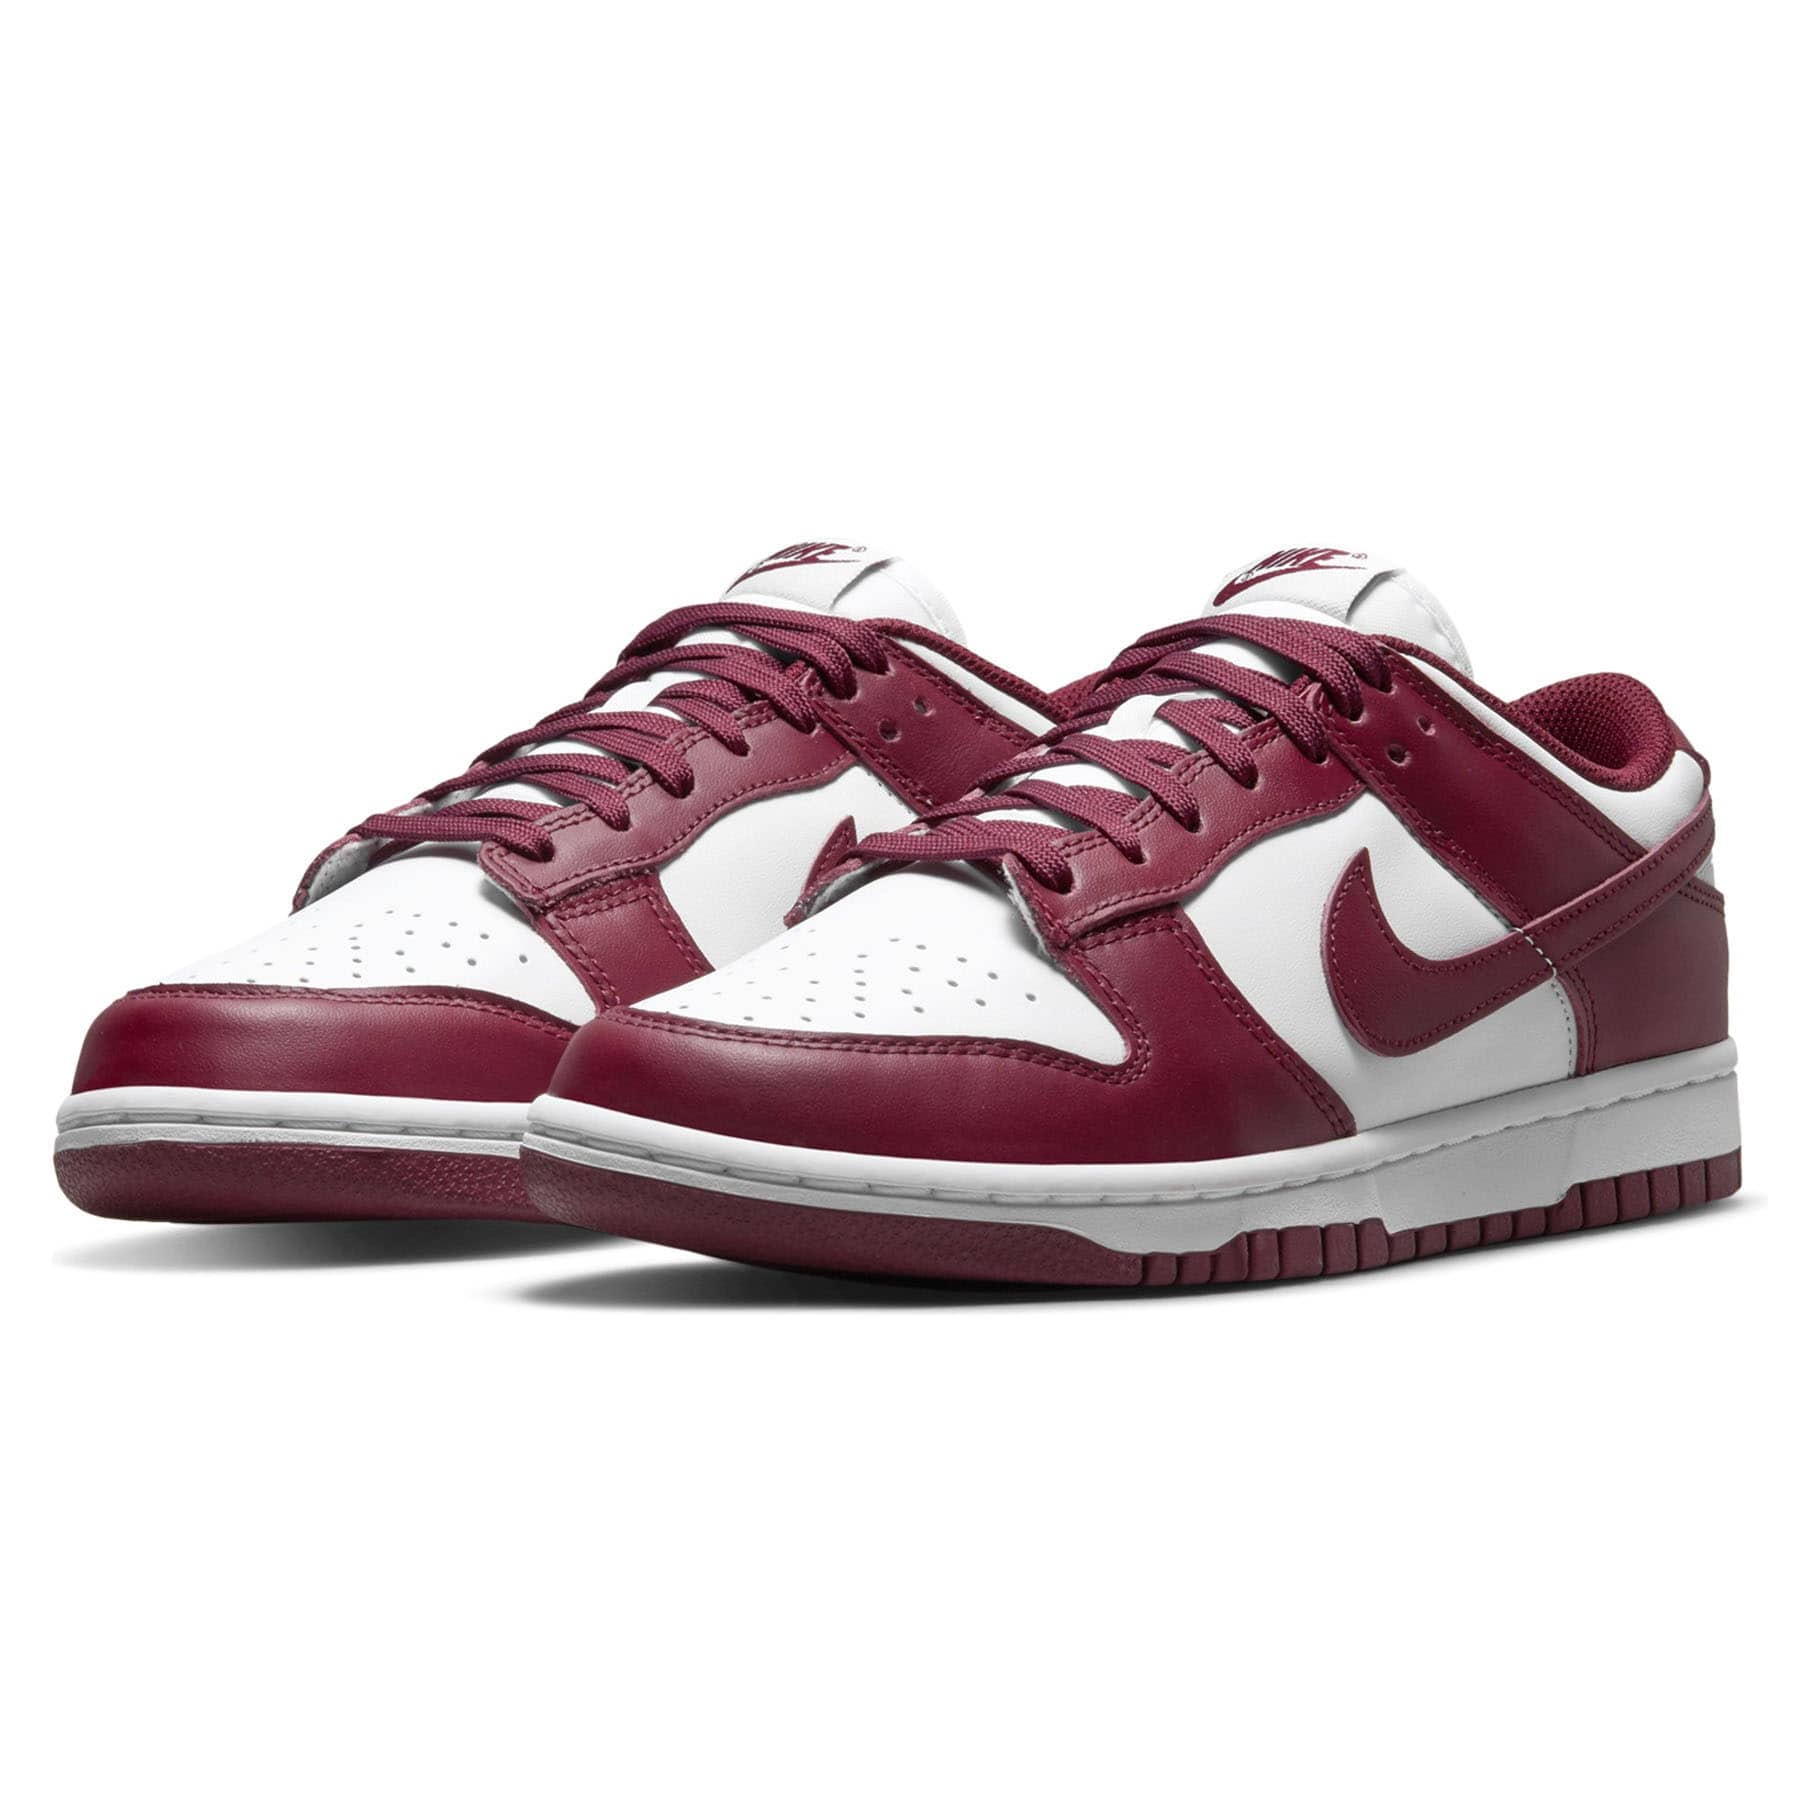 Double Boxed  299.99 Nike Dunk Low Dark Bordeaux (W) Double Boxed